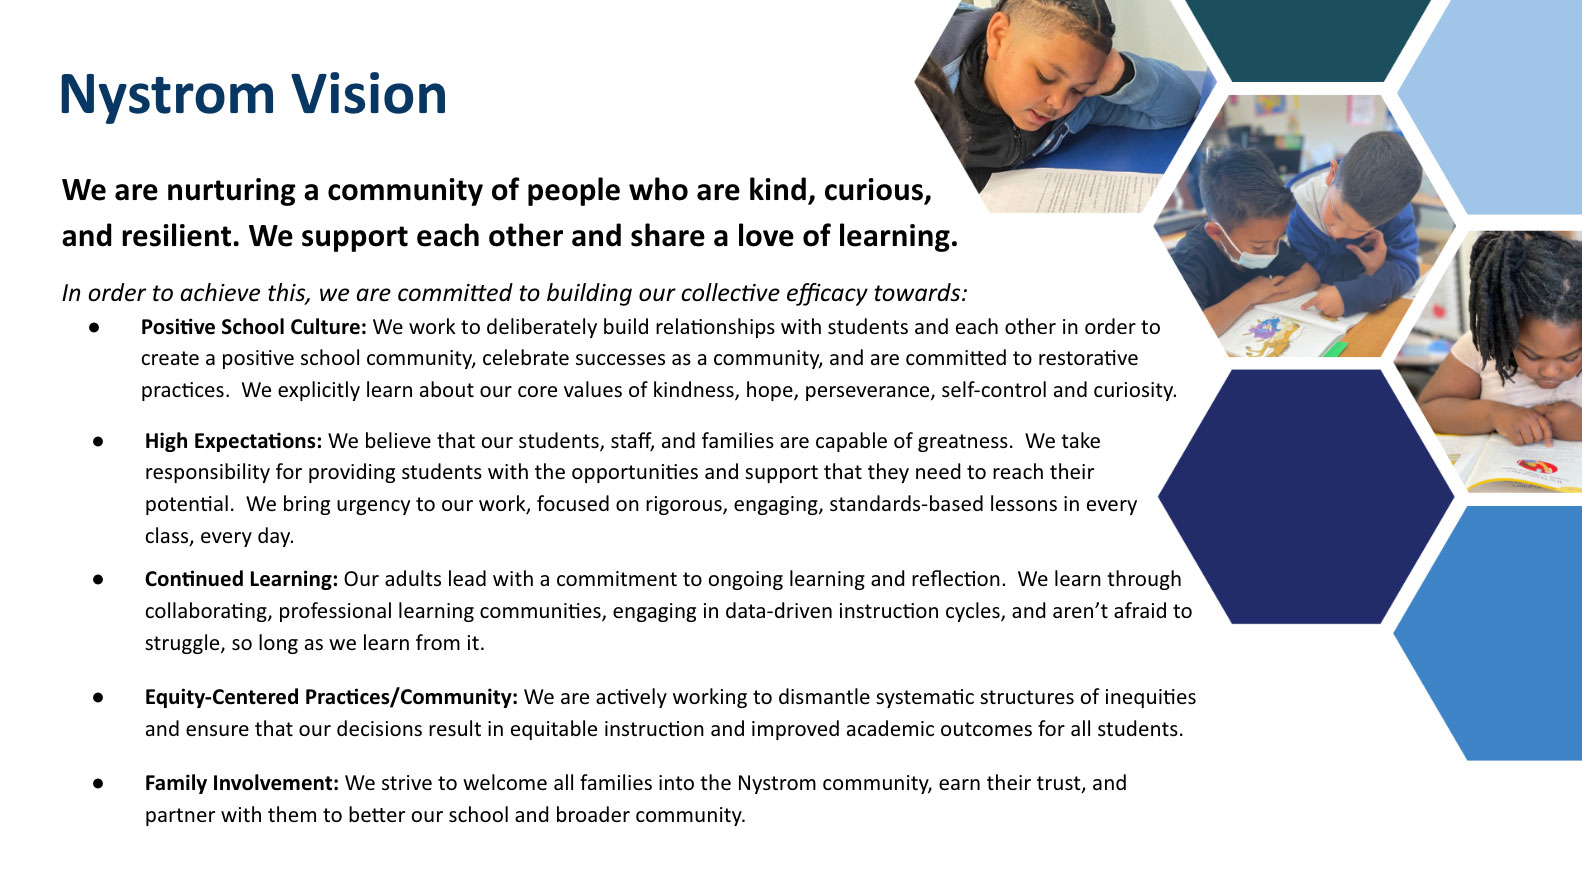 Vision statement for Nystrom Elementary School in Oakland, California